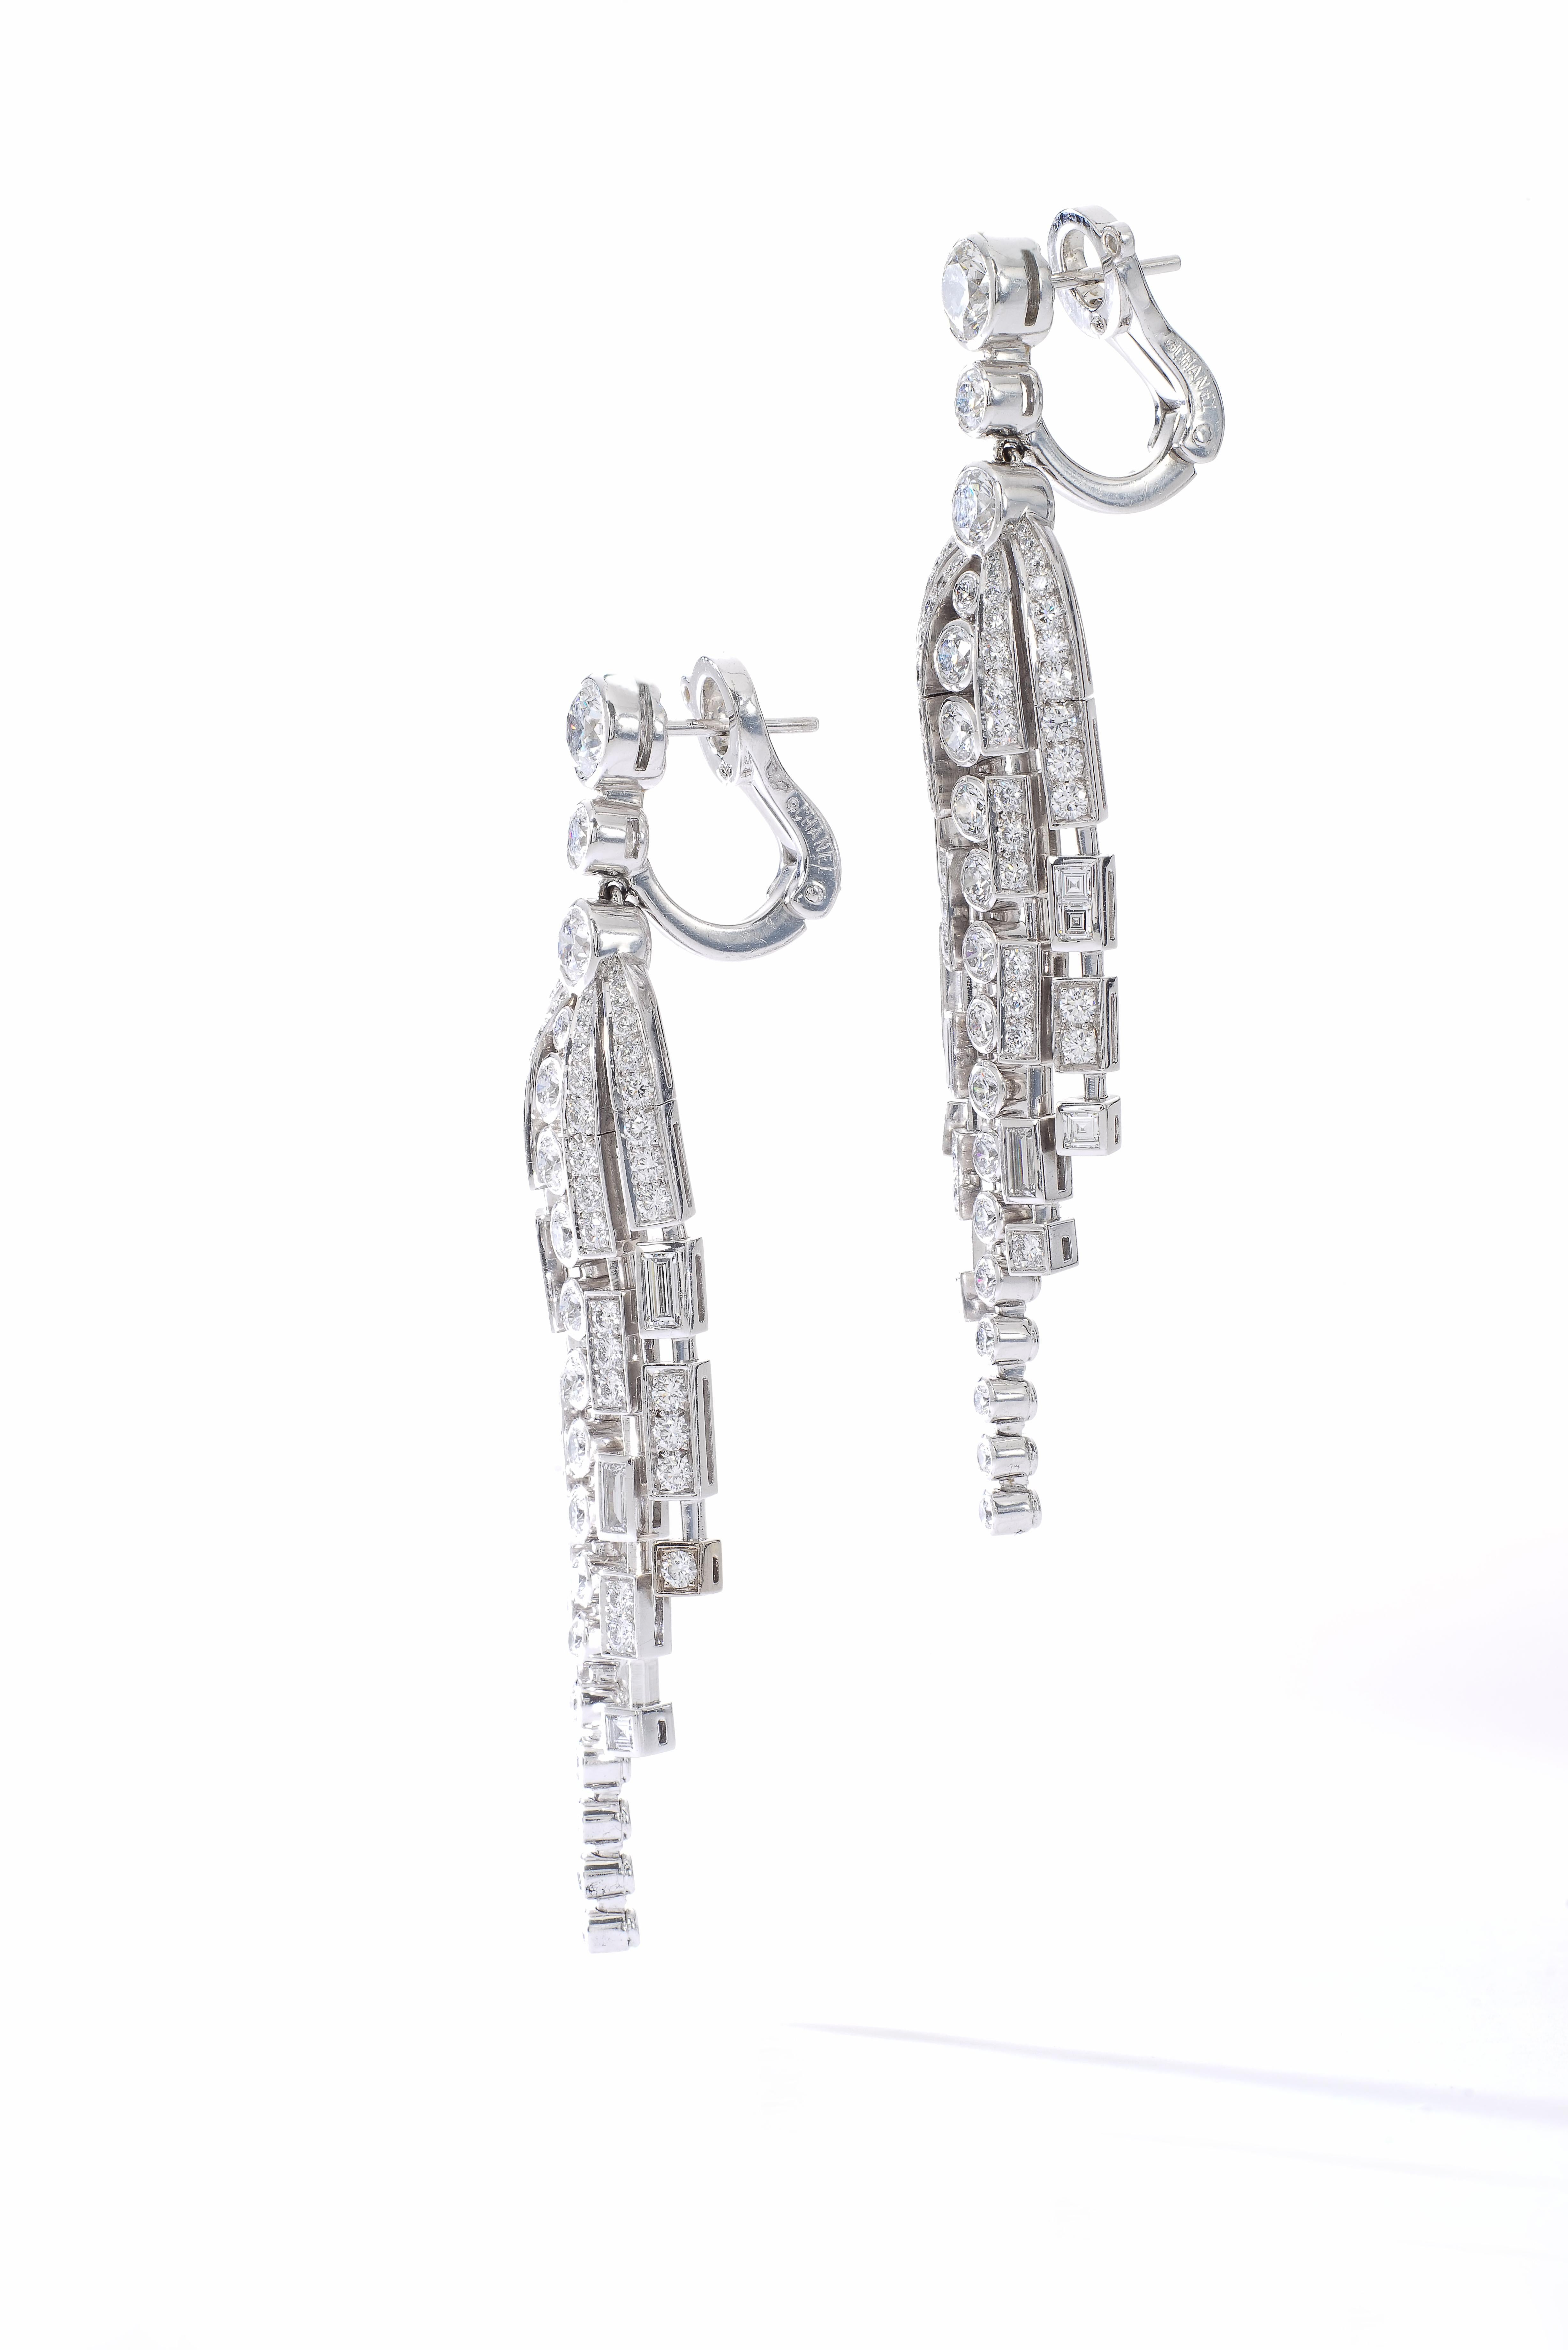 Inspired by the Chanel collection 1932 those Earrings are beautifully made.
Contemporary with amazing Art Deco design.

Diamond on white gold 18k.
Signed Chanel, numbered and marked.

Original invoice from Chanel.
Retail price Usd129,000.-


